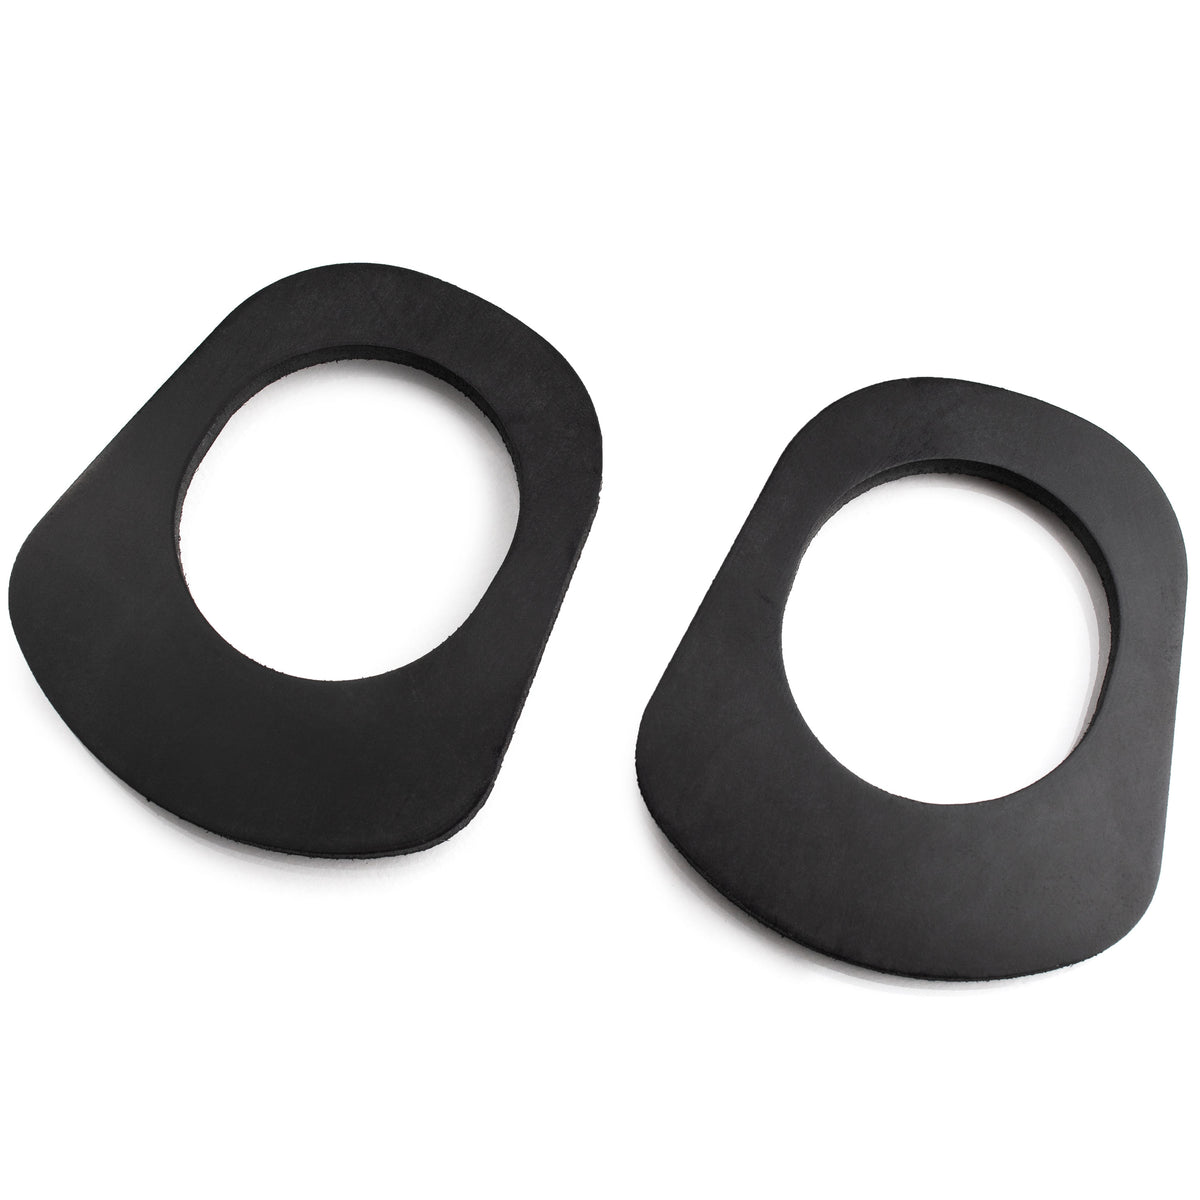 Wavian Fuel Cans - Replacement Gaskets (2pk)